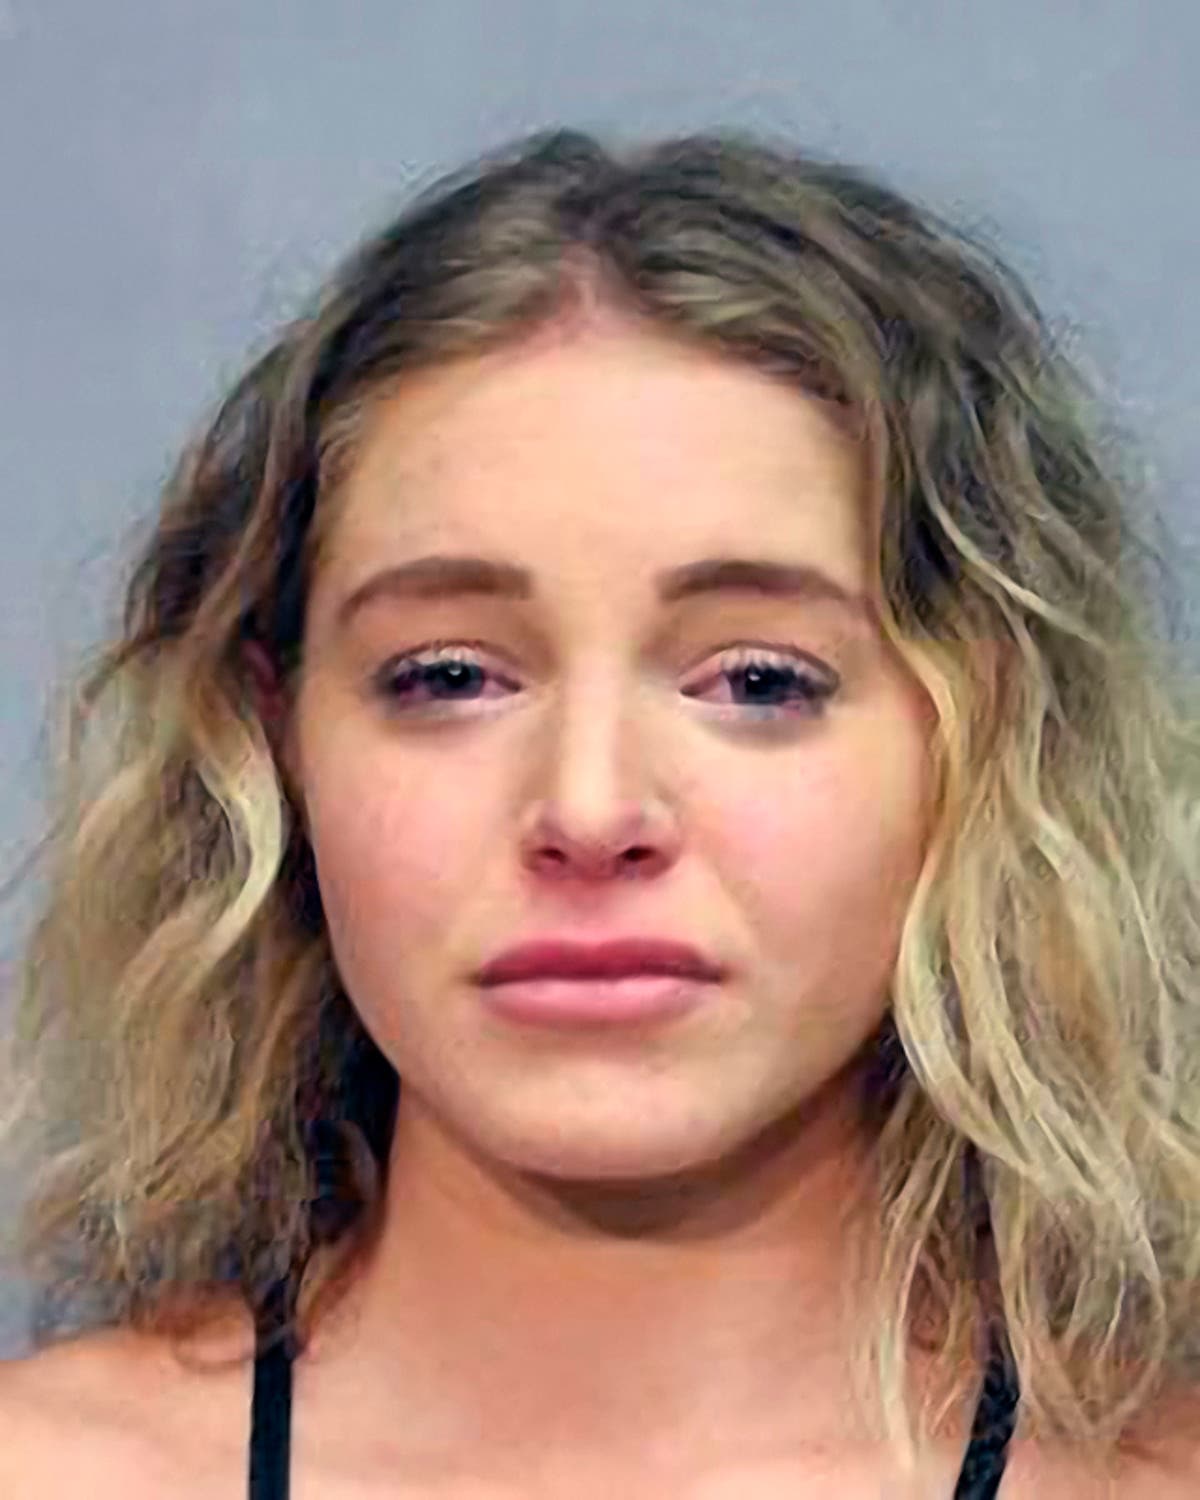 Social media model charged with killing boyfriend in Florida